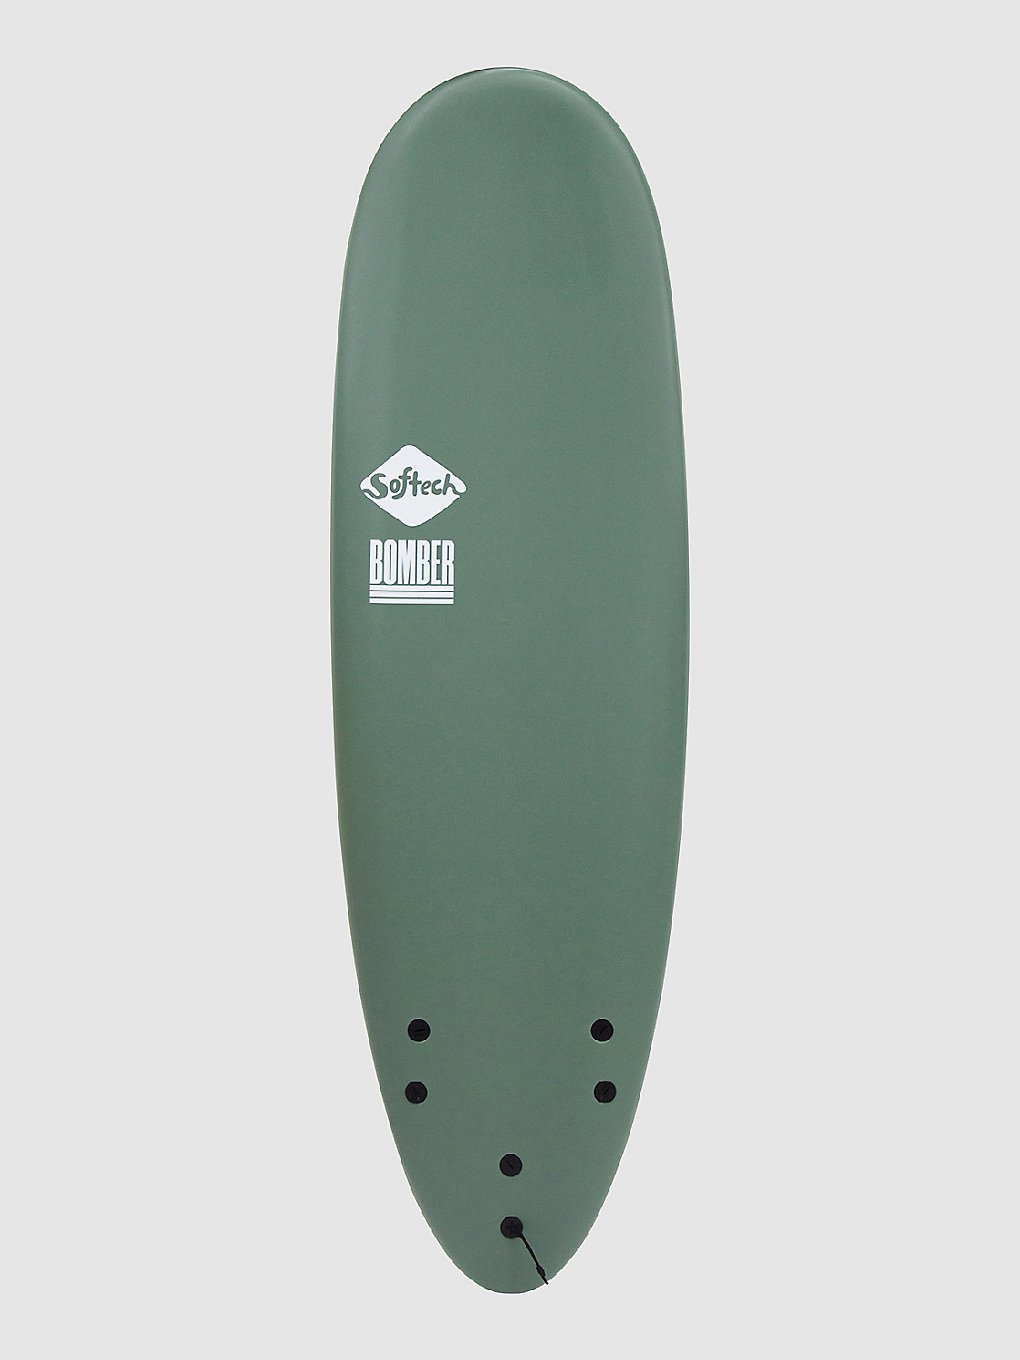 Softech Bomber FCS II 5'10 Softtop Surfboard white